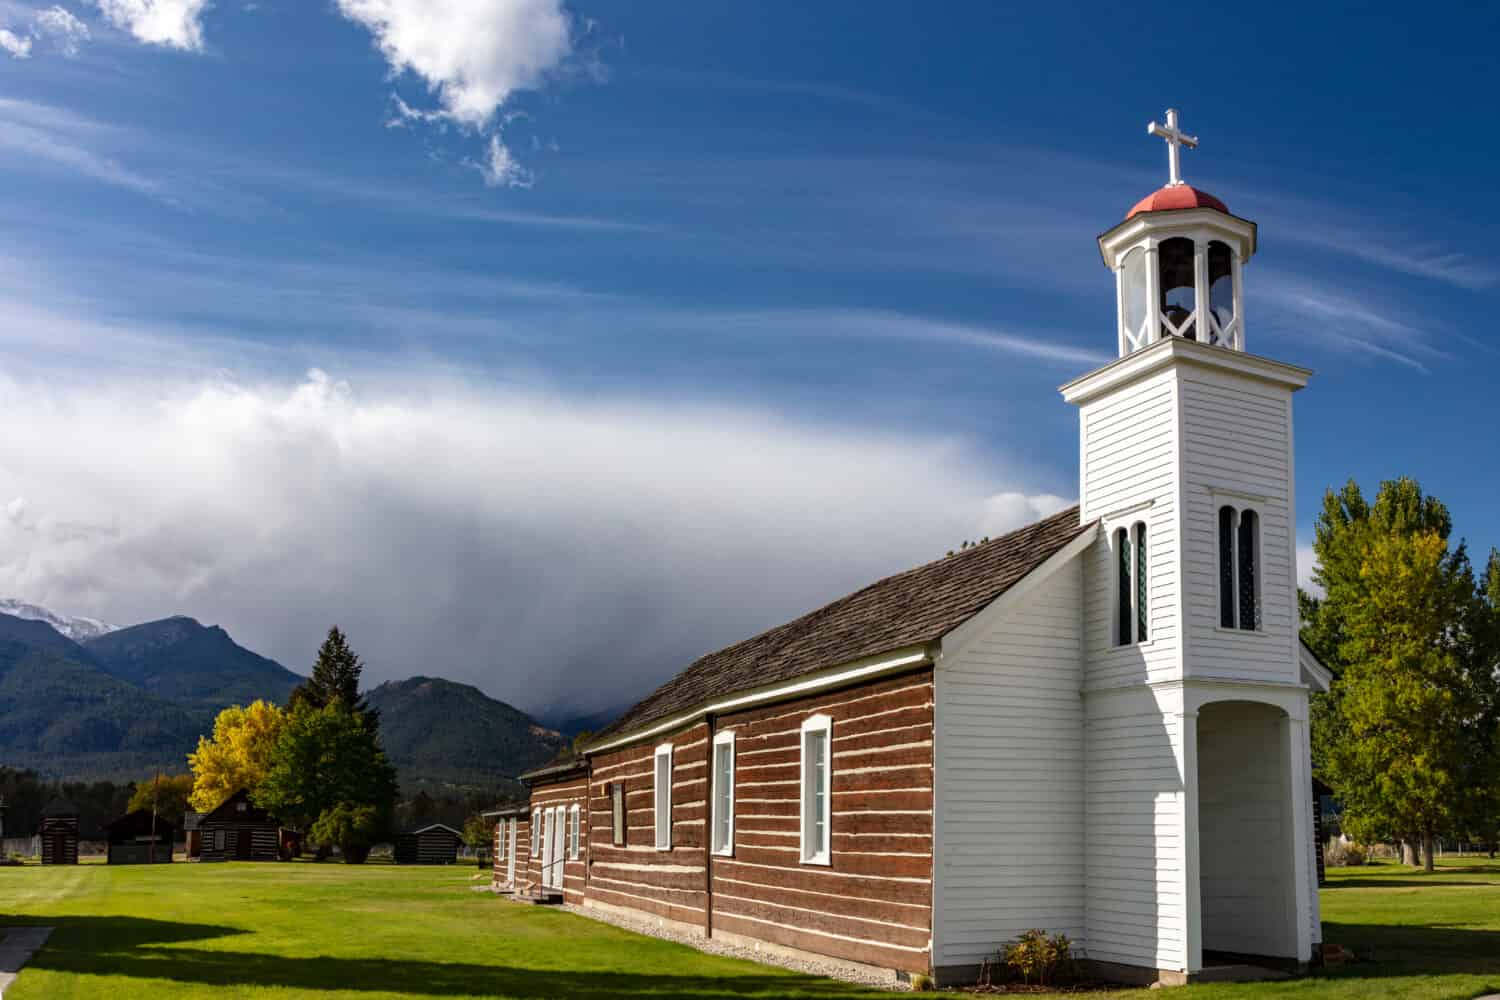 Historic St. Mary's Mission in Stevensville, Montana, USA